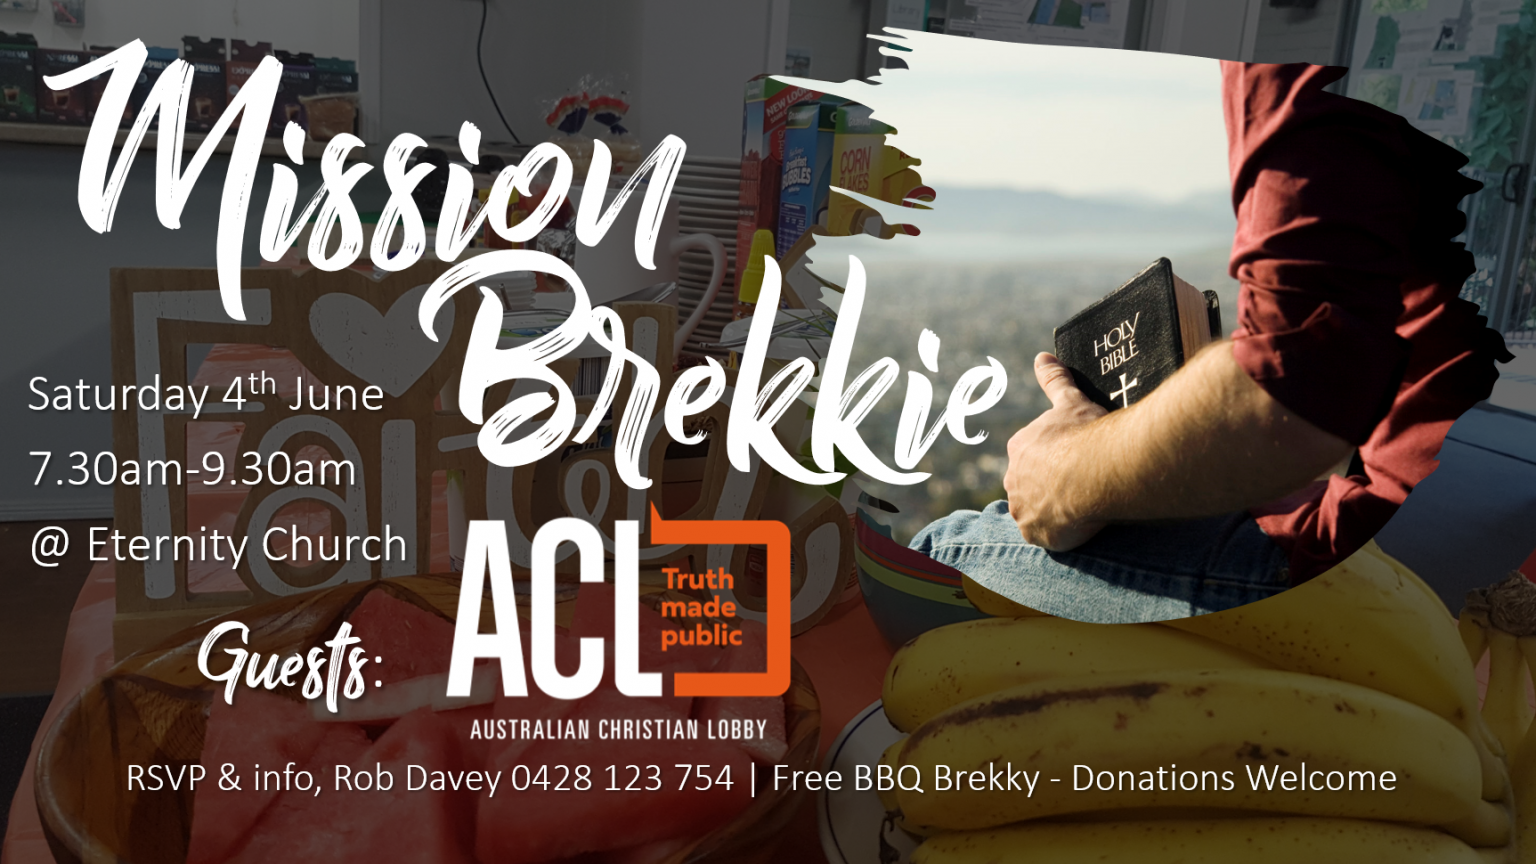 MISSION BREKKIE with ACL Saturday 4th June 7:30am